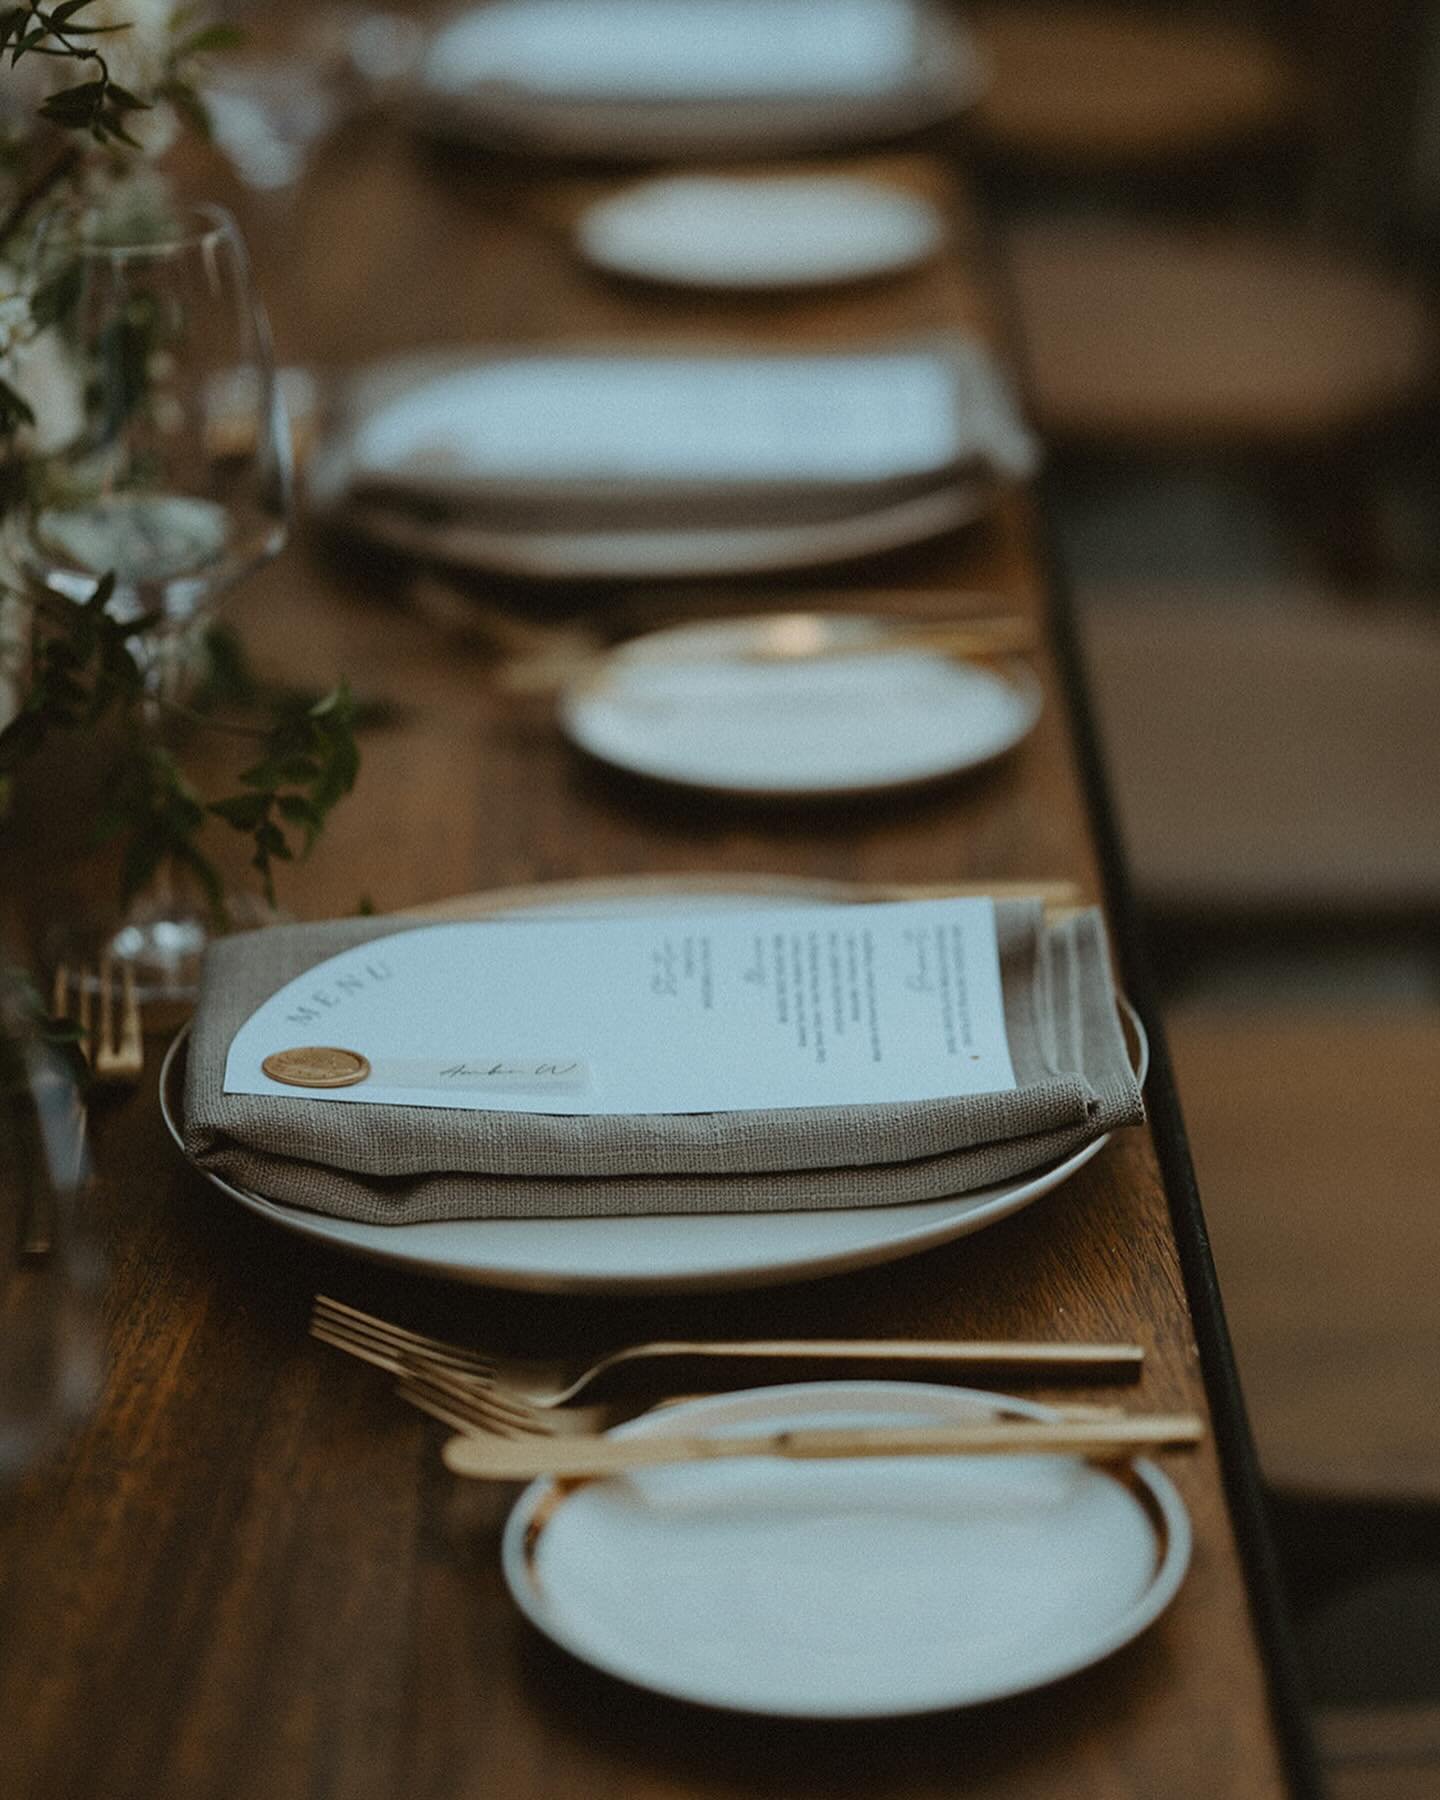 Creating an inviting tablescape is top priority for us when we get to the aesthetics and design phase of our planning process!

There is a lot that goes in to ensuring guests have the best experience possible - down to the height of the floral arrang